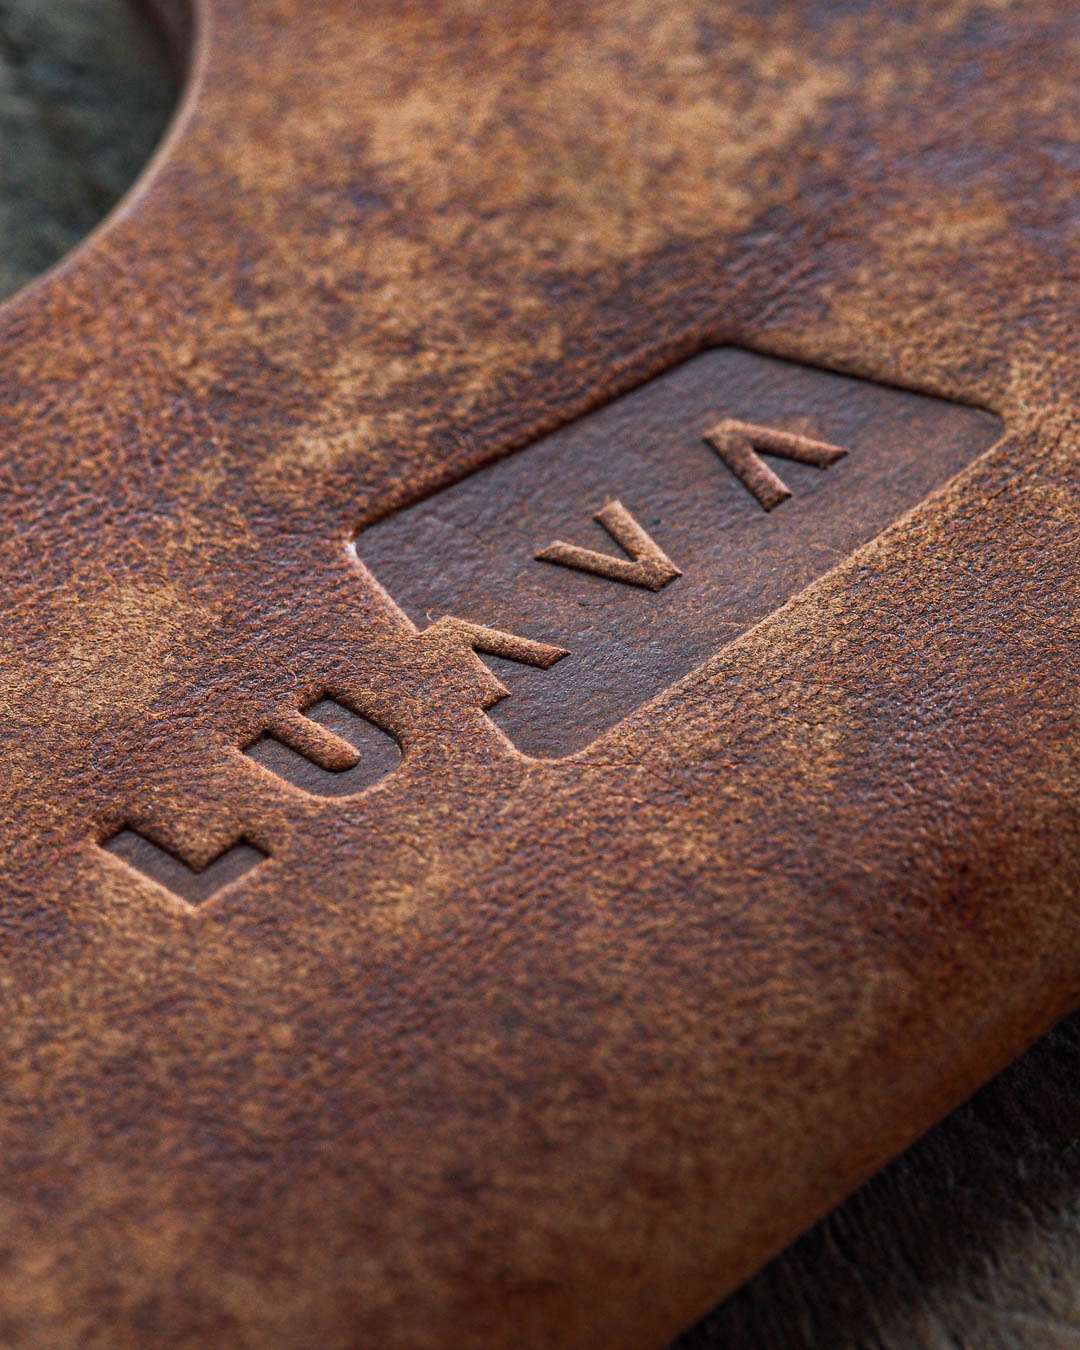 Luava handmade leather wallet handcrafted leatherwallet cardholder card holder cardwallet vegetable tanned absolute text logo detail